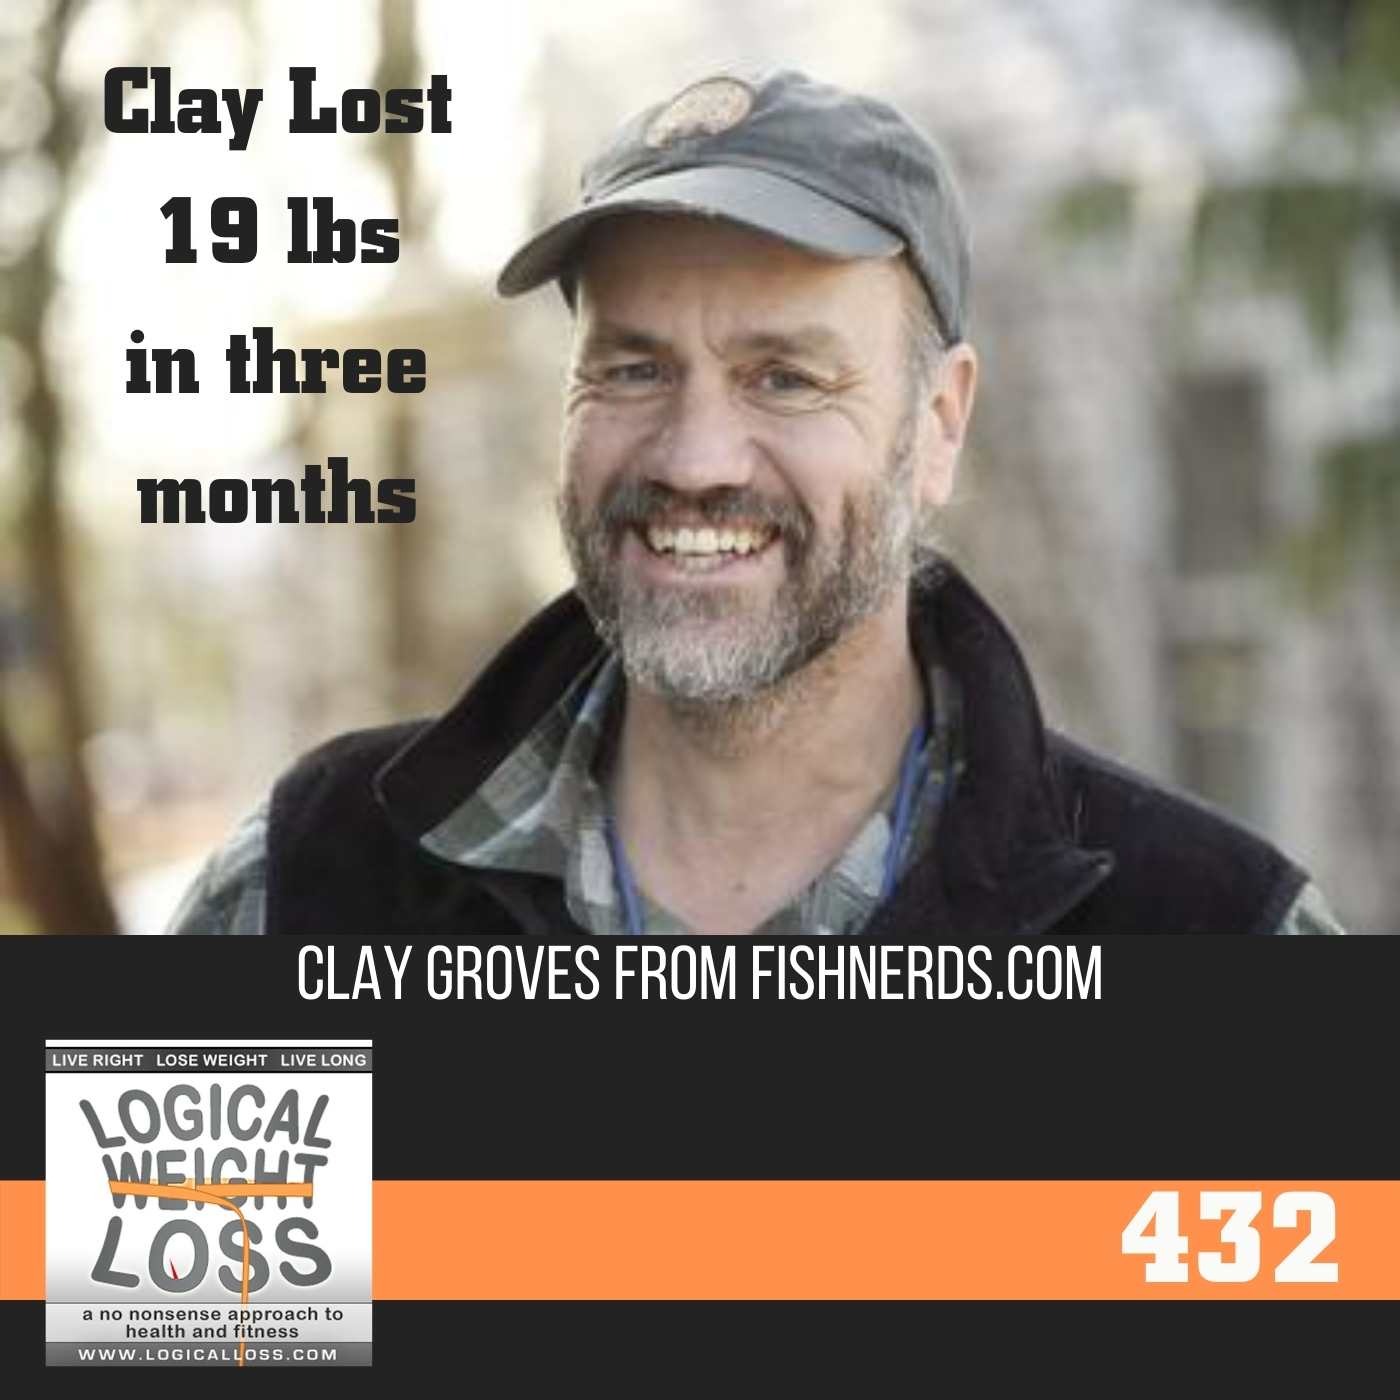 Clay has Lost 19 lbs since January Image